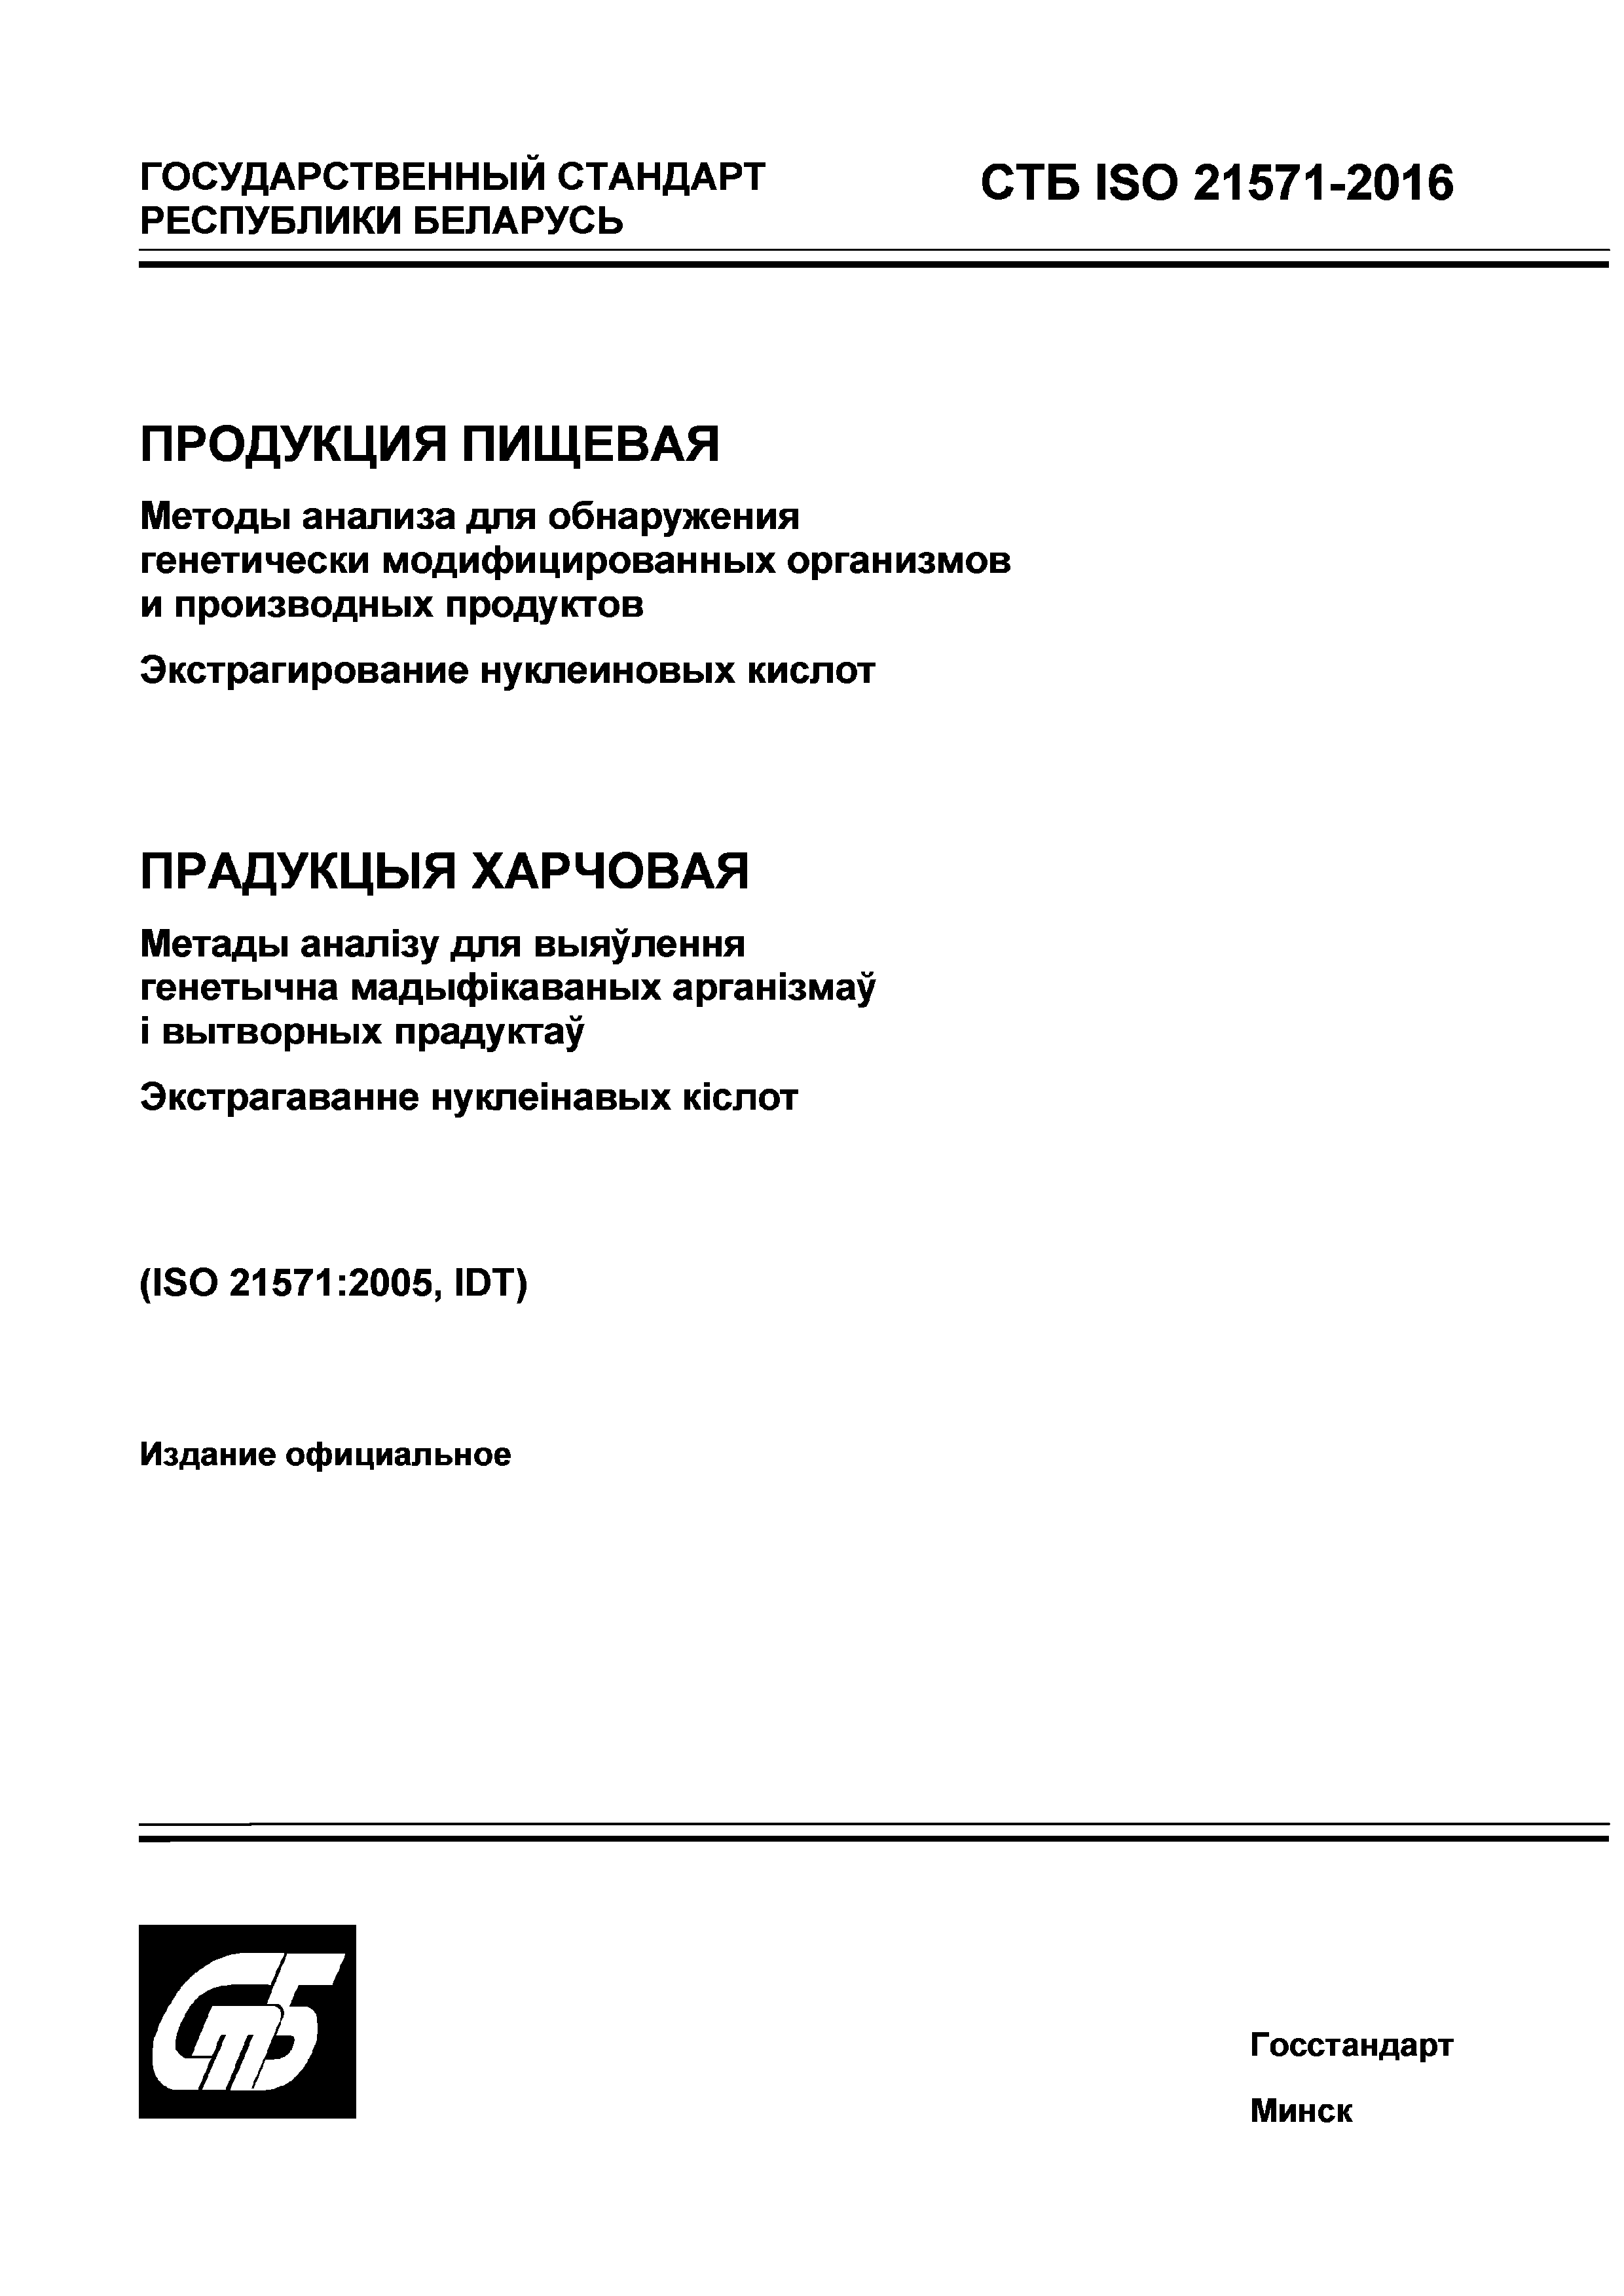 СТБ ISO 21571-2016